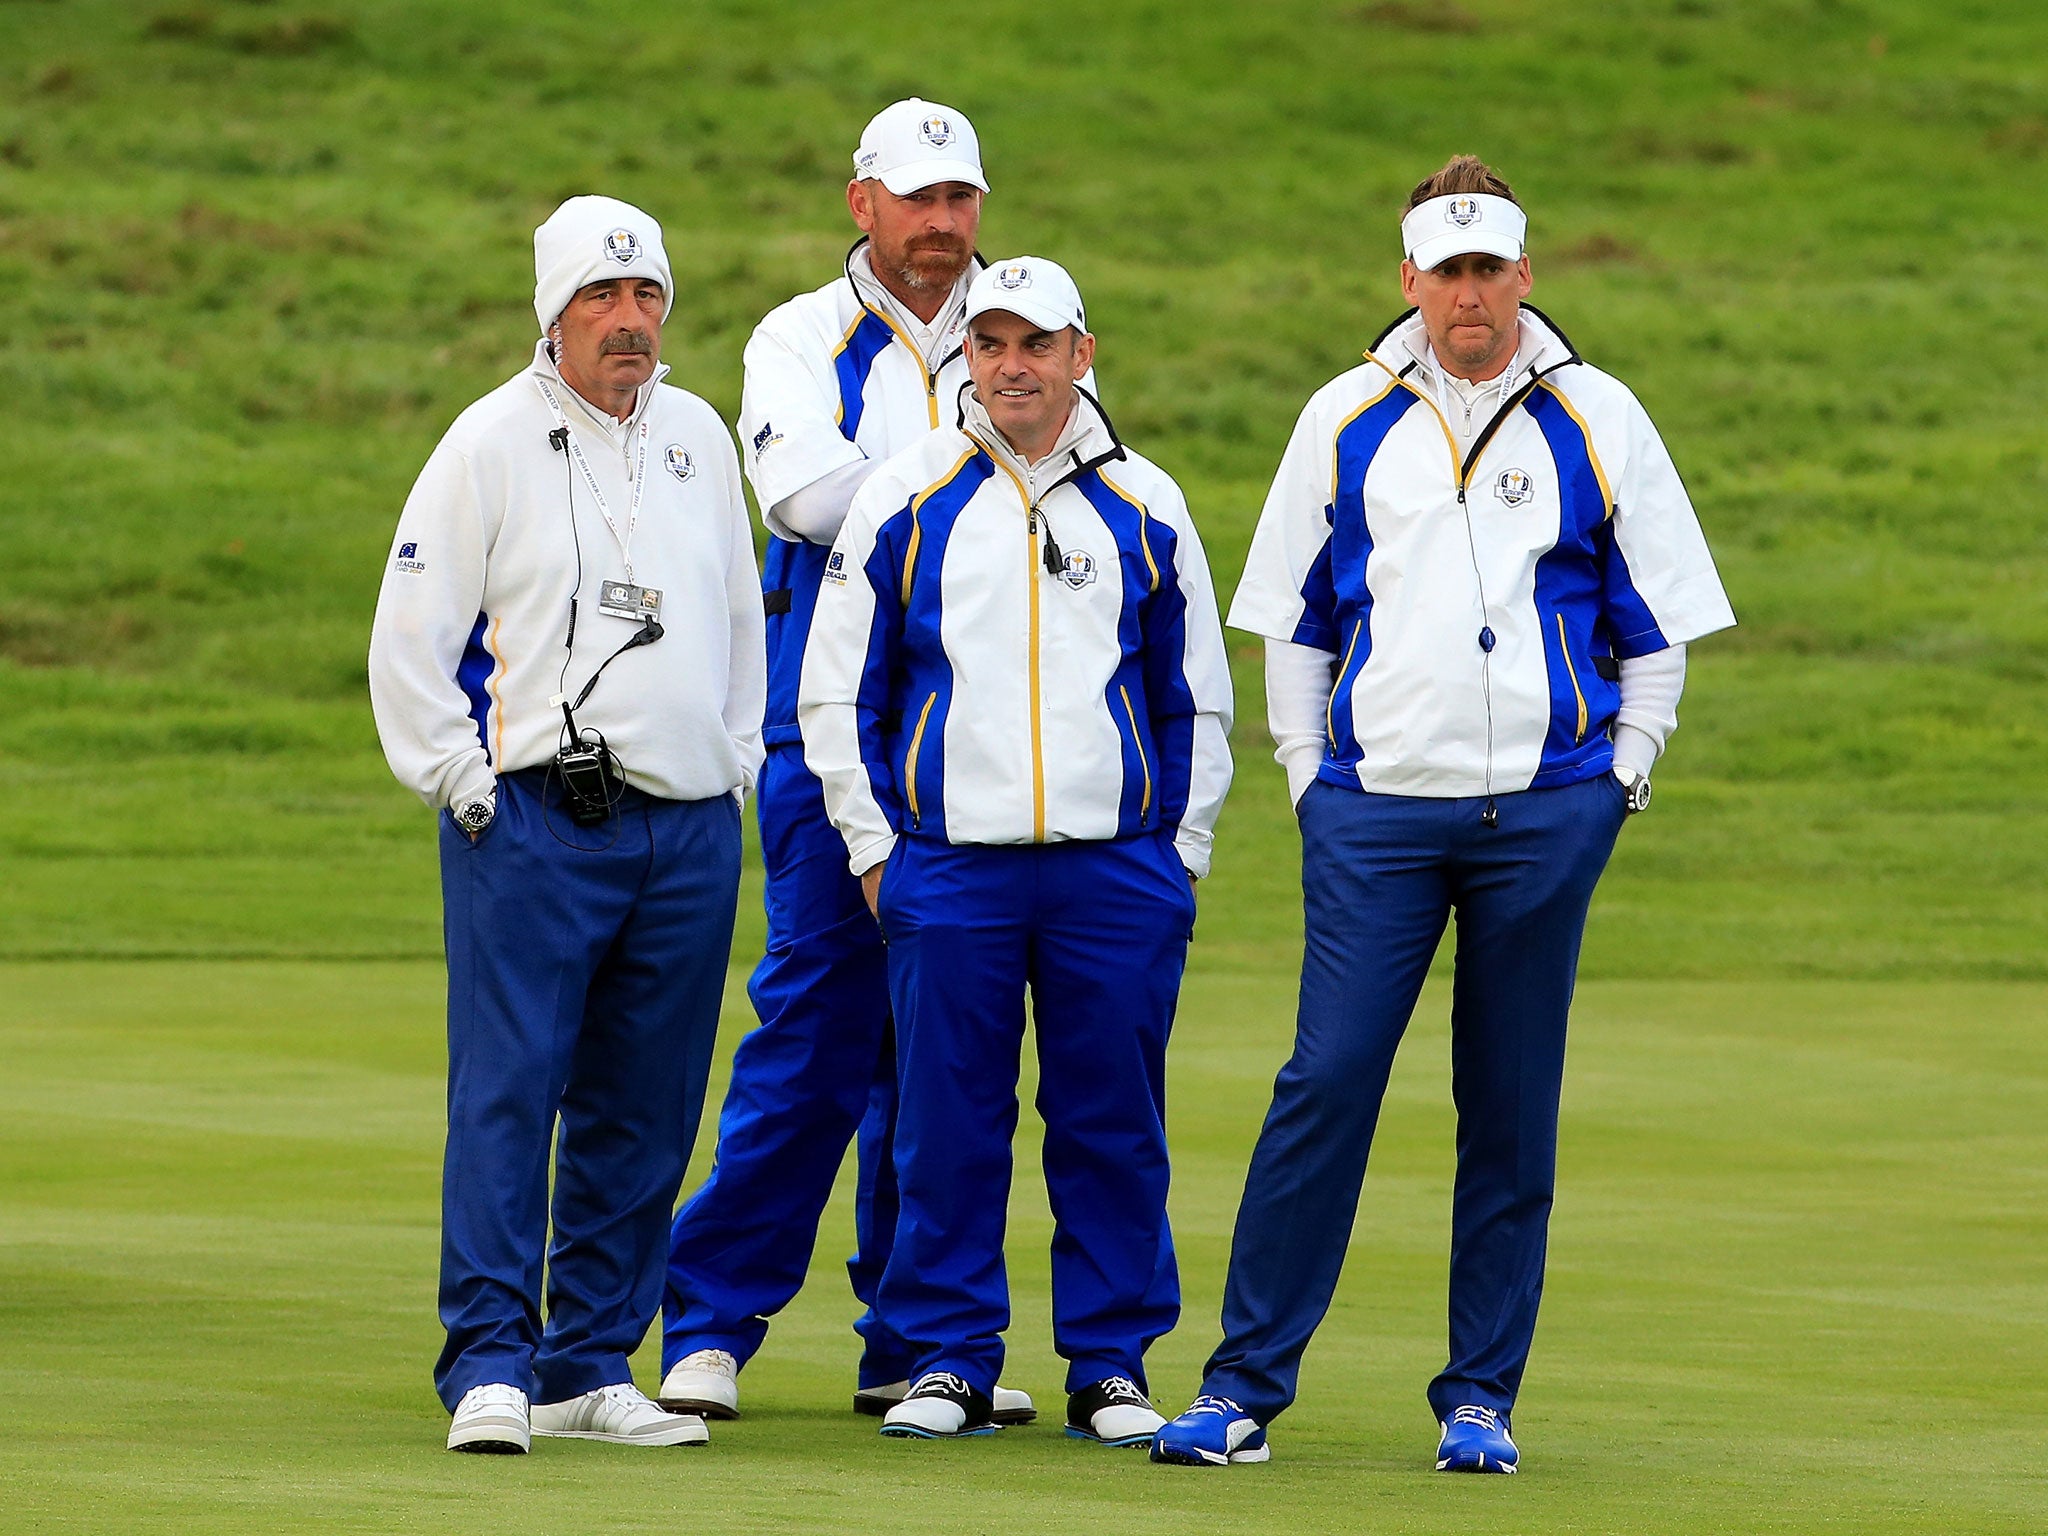 Sam Torrence, Thomas Bjorn, Paul McGinley and Ian Poulter